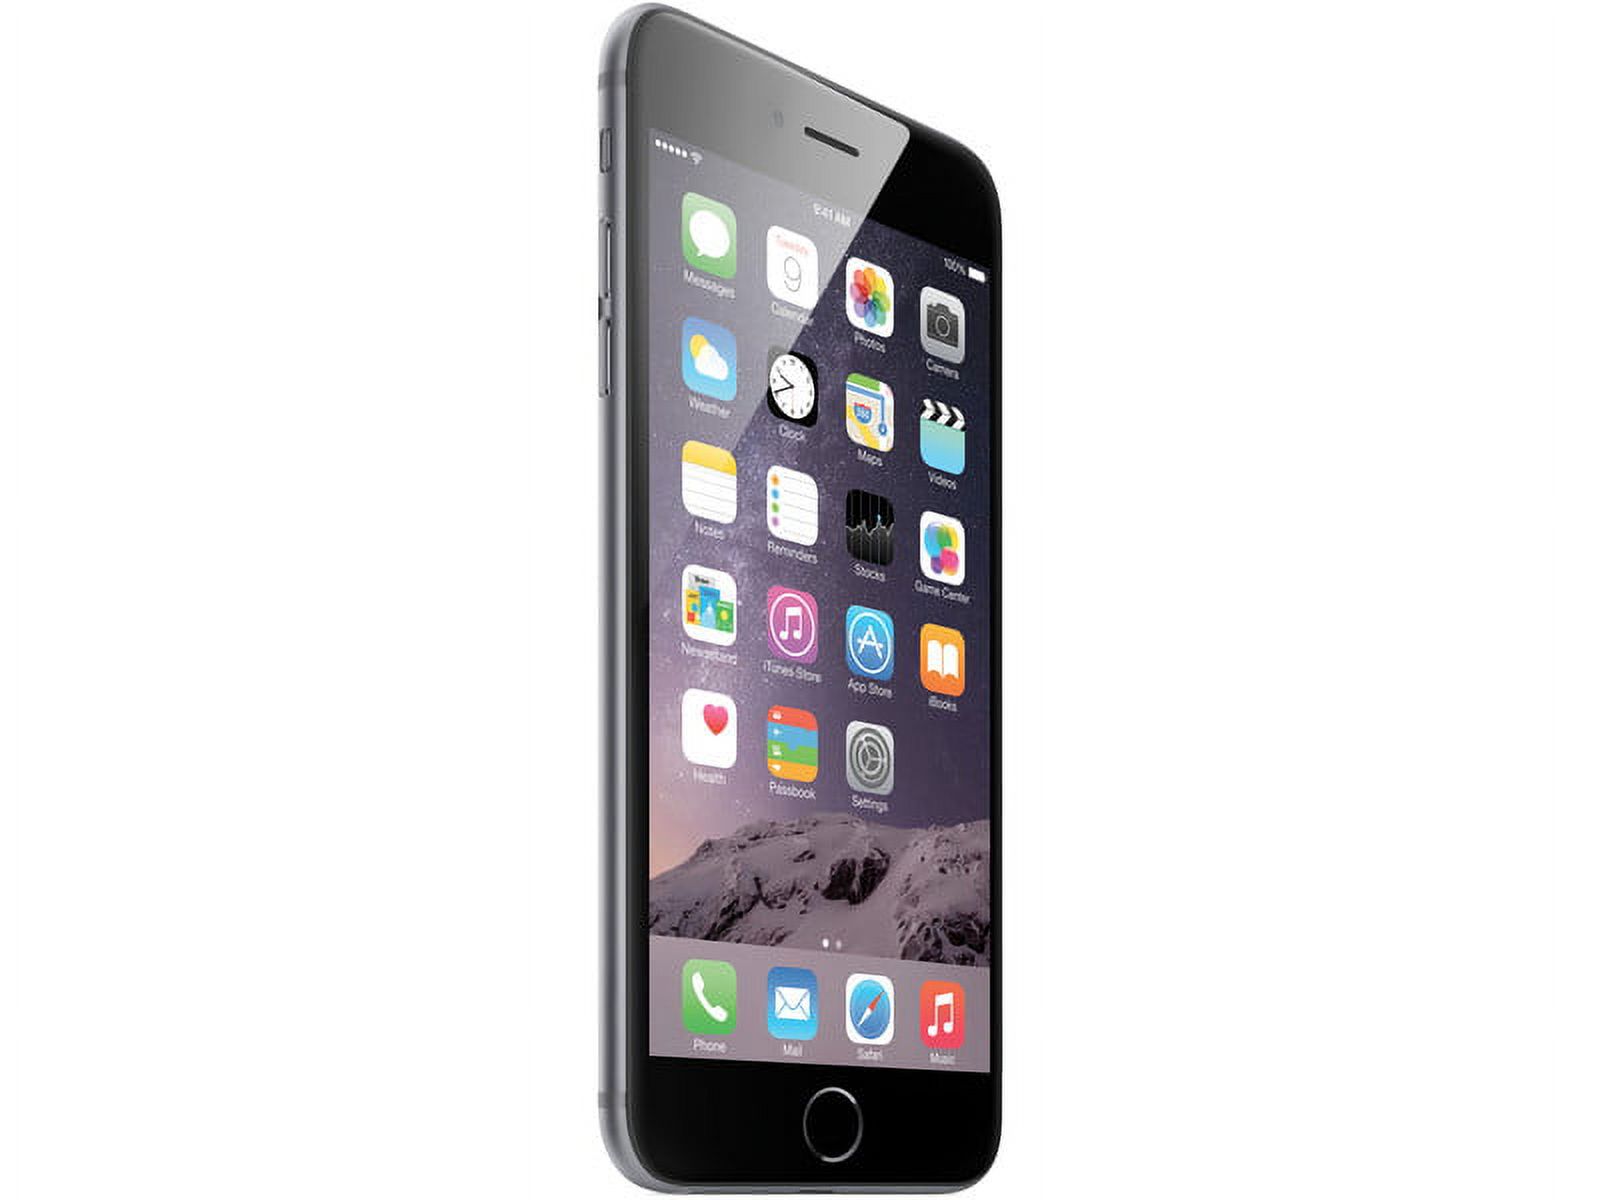 Restored Apple iPhone 6 Plus 16GB Space Gray LTE Cellular AT&T MGAL2LL/A (Refurbished) - image 2 of 3